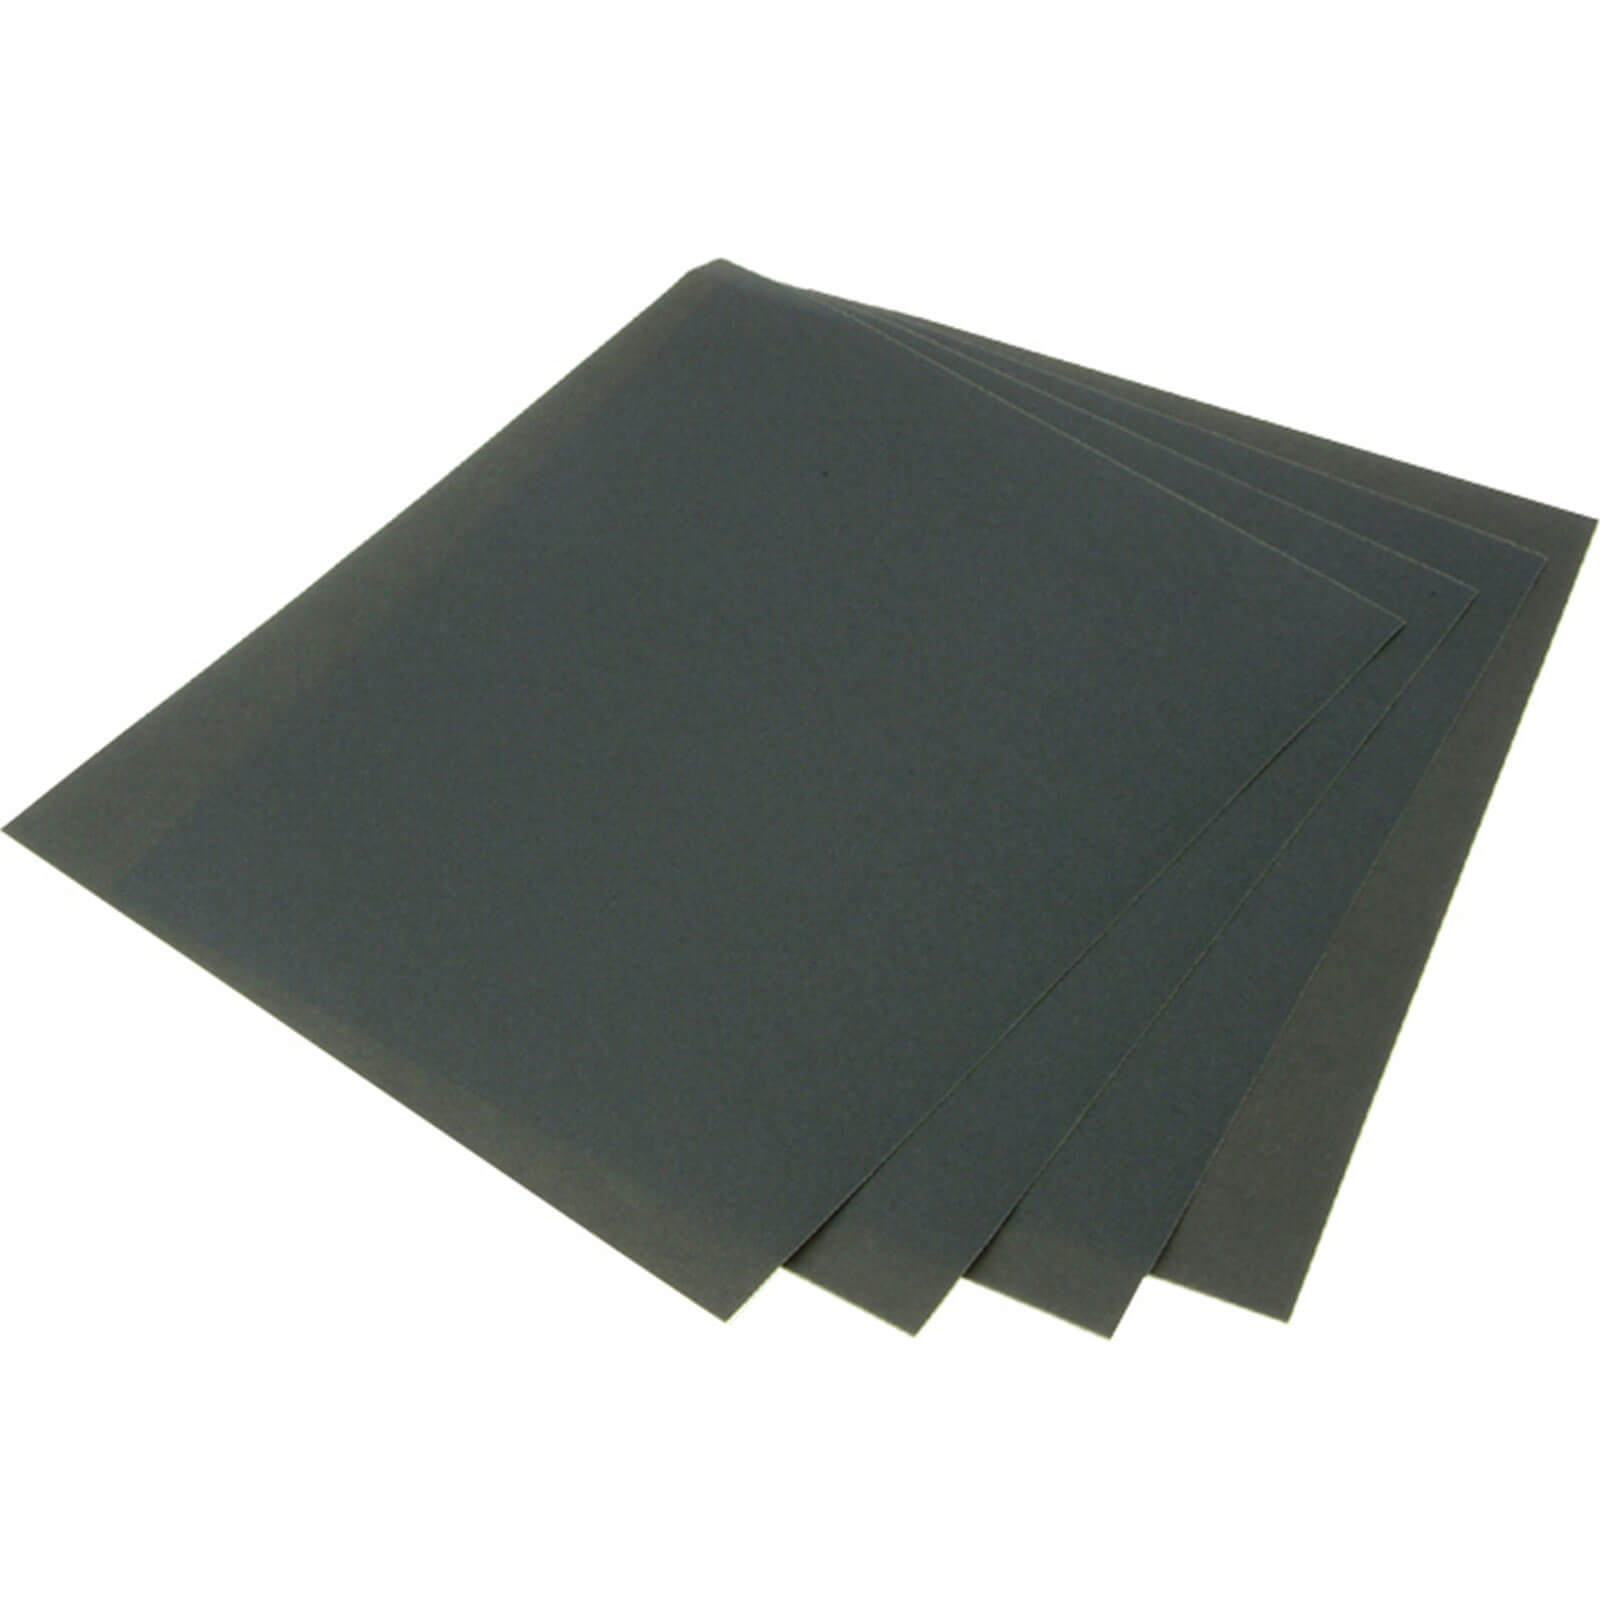 Image of Faithfull Wet and Dry Paper Sheets 230 x 280mm 320g Pack of 25